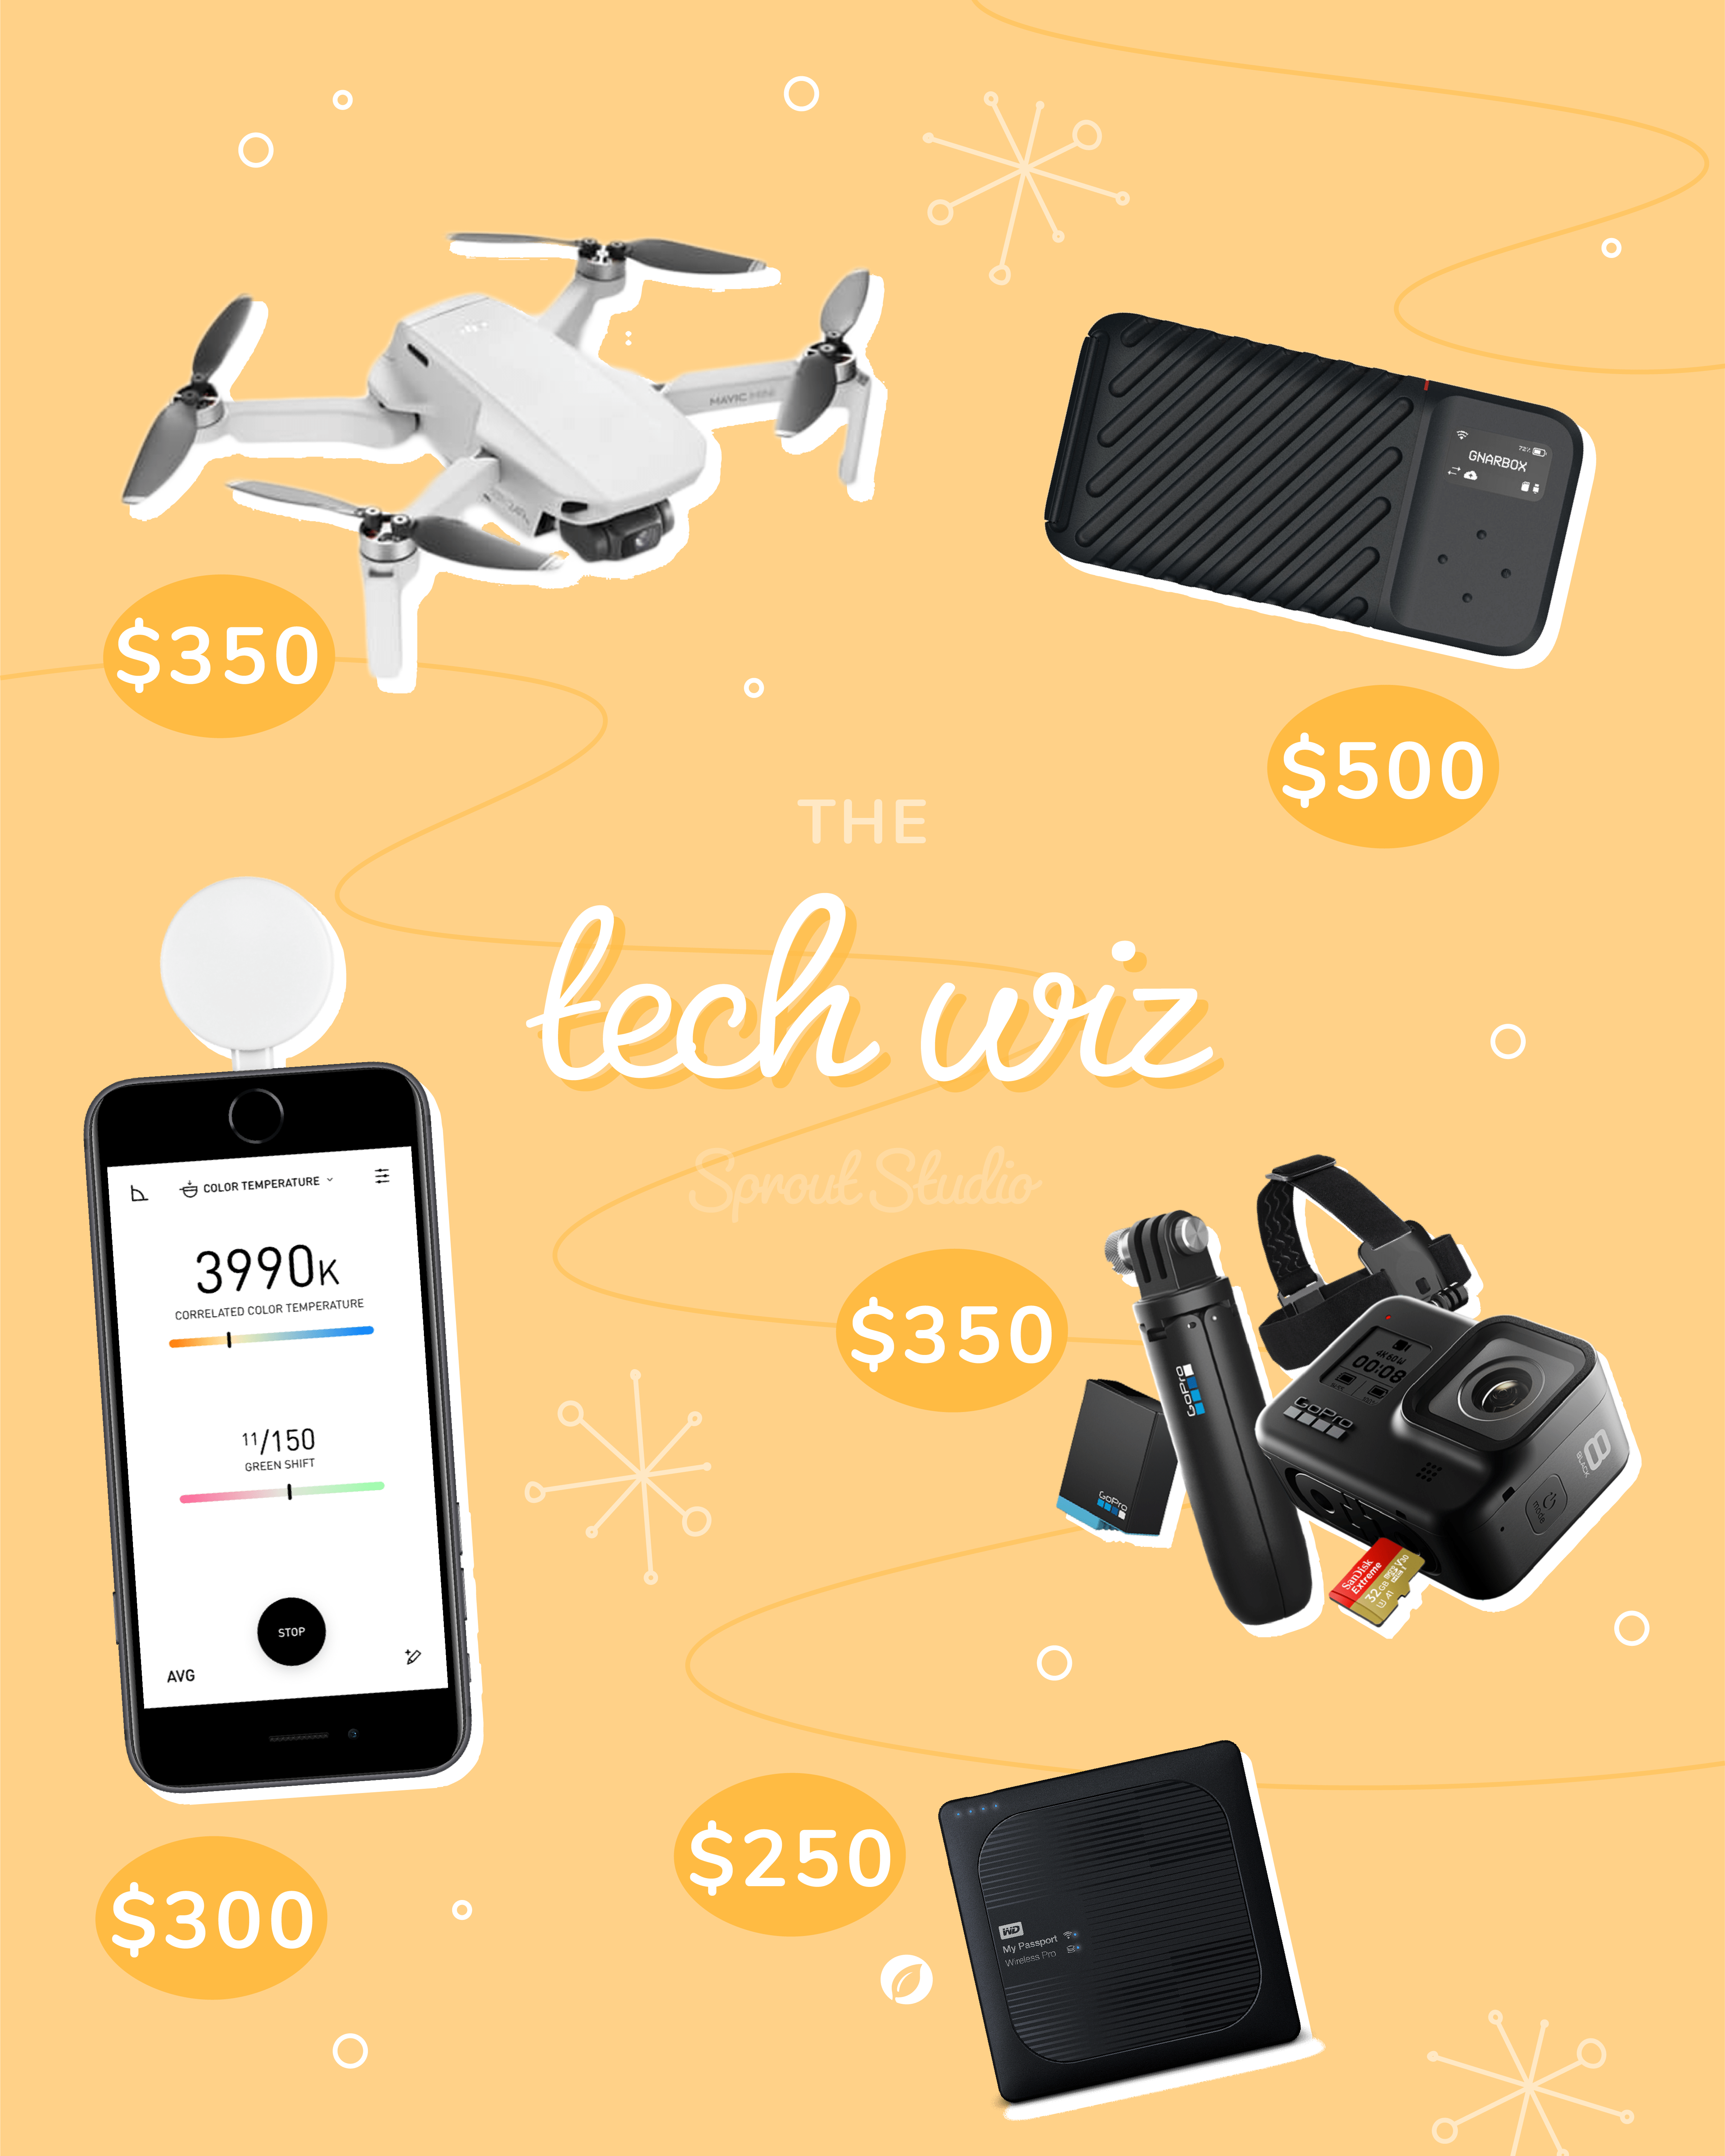 Photography gifts for the "tech wiz"